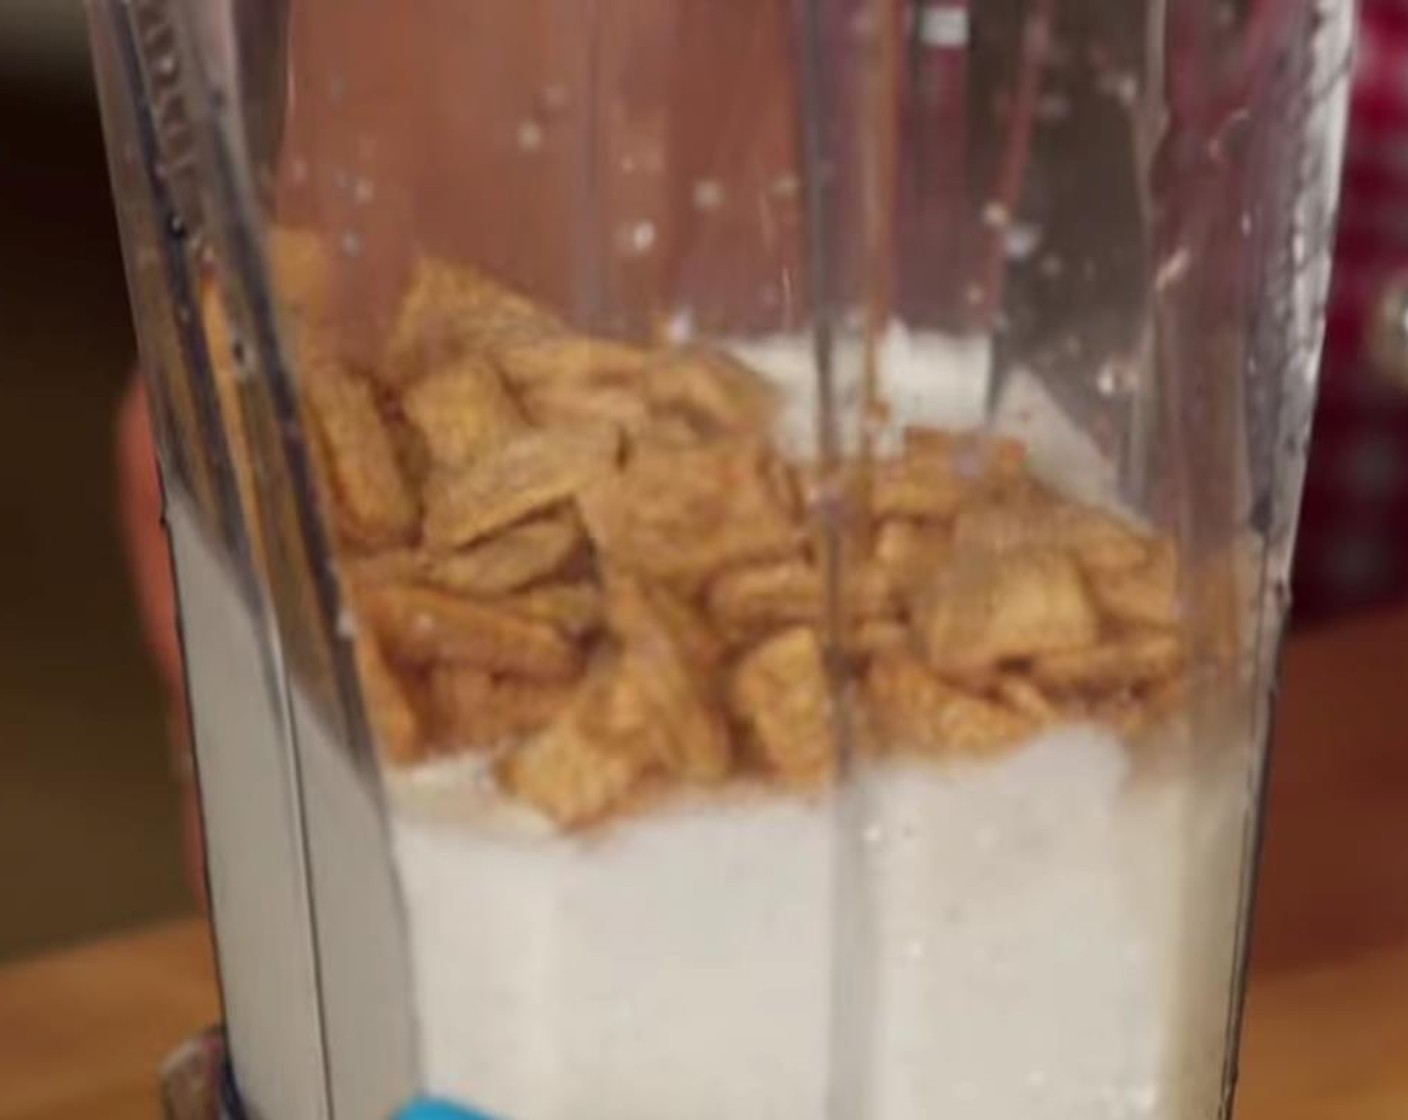 step 1 Add Vanilla Bean Ice Cream (2 scoops), Ice (1/2 cup), Milk (3/4 cup), Cinnamon Toast Crunch™ Cereal (2 Tbsp), Cinnamon Syrup (1 Tbsp), and Granulated Sugar (1/2 Tbsp) to a blender, and blend until smooth.